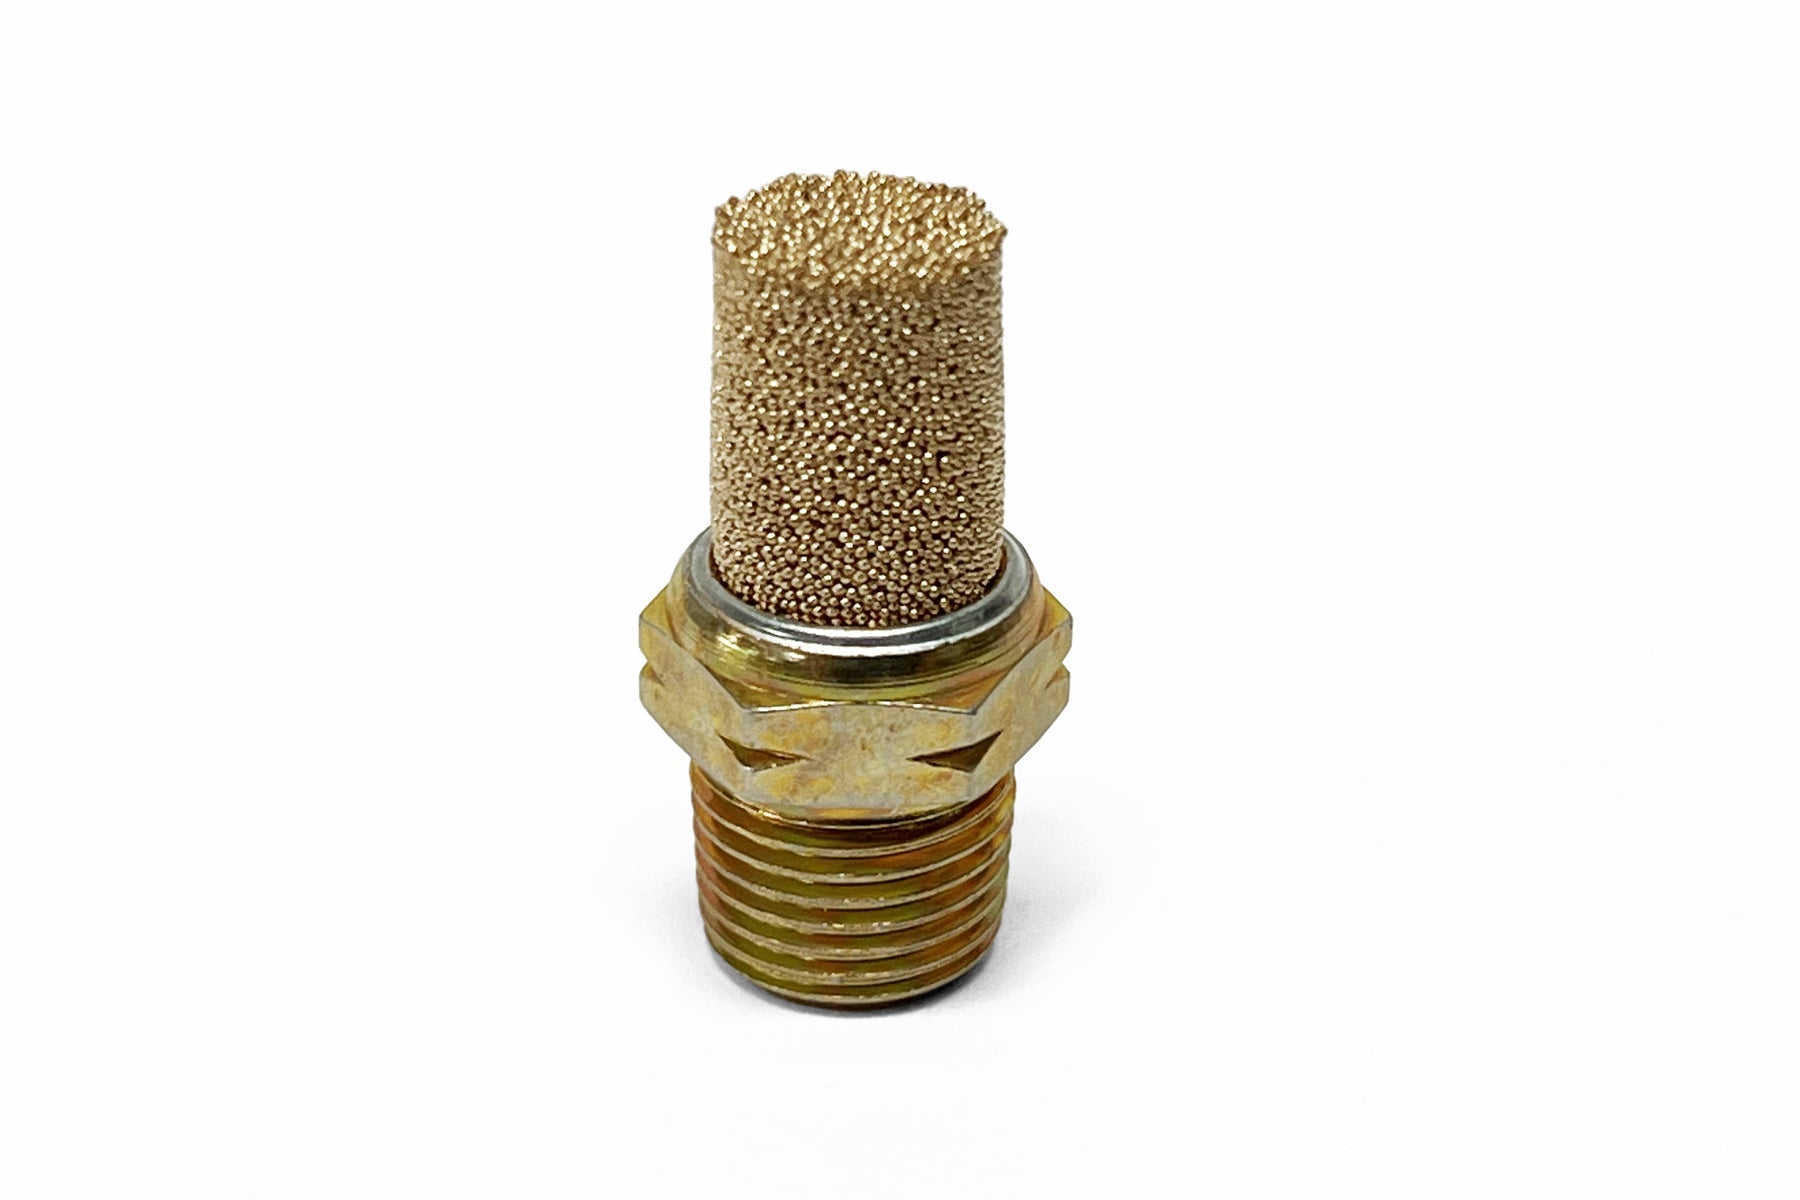 OPTIONAL PROFEC 1/8 CONE OUTLET FILTER - (11901699)